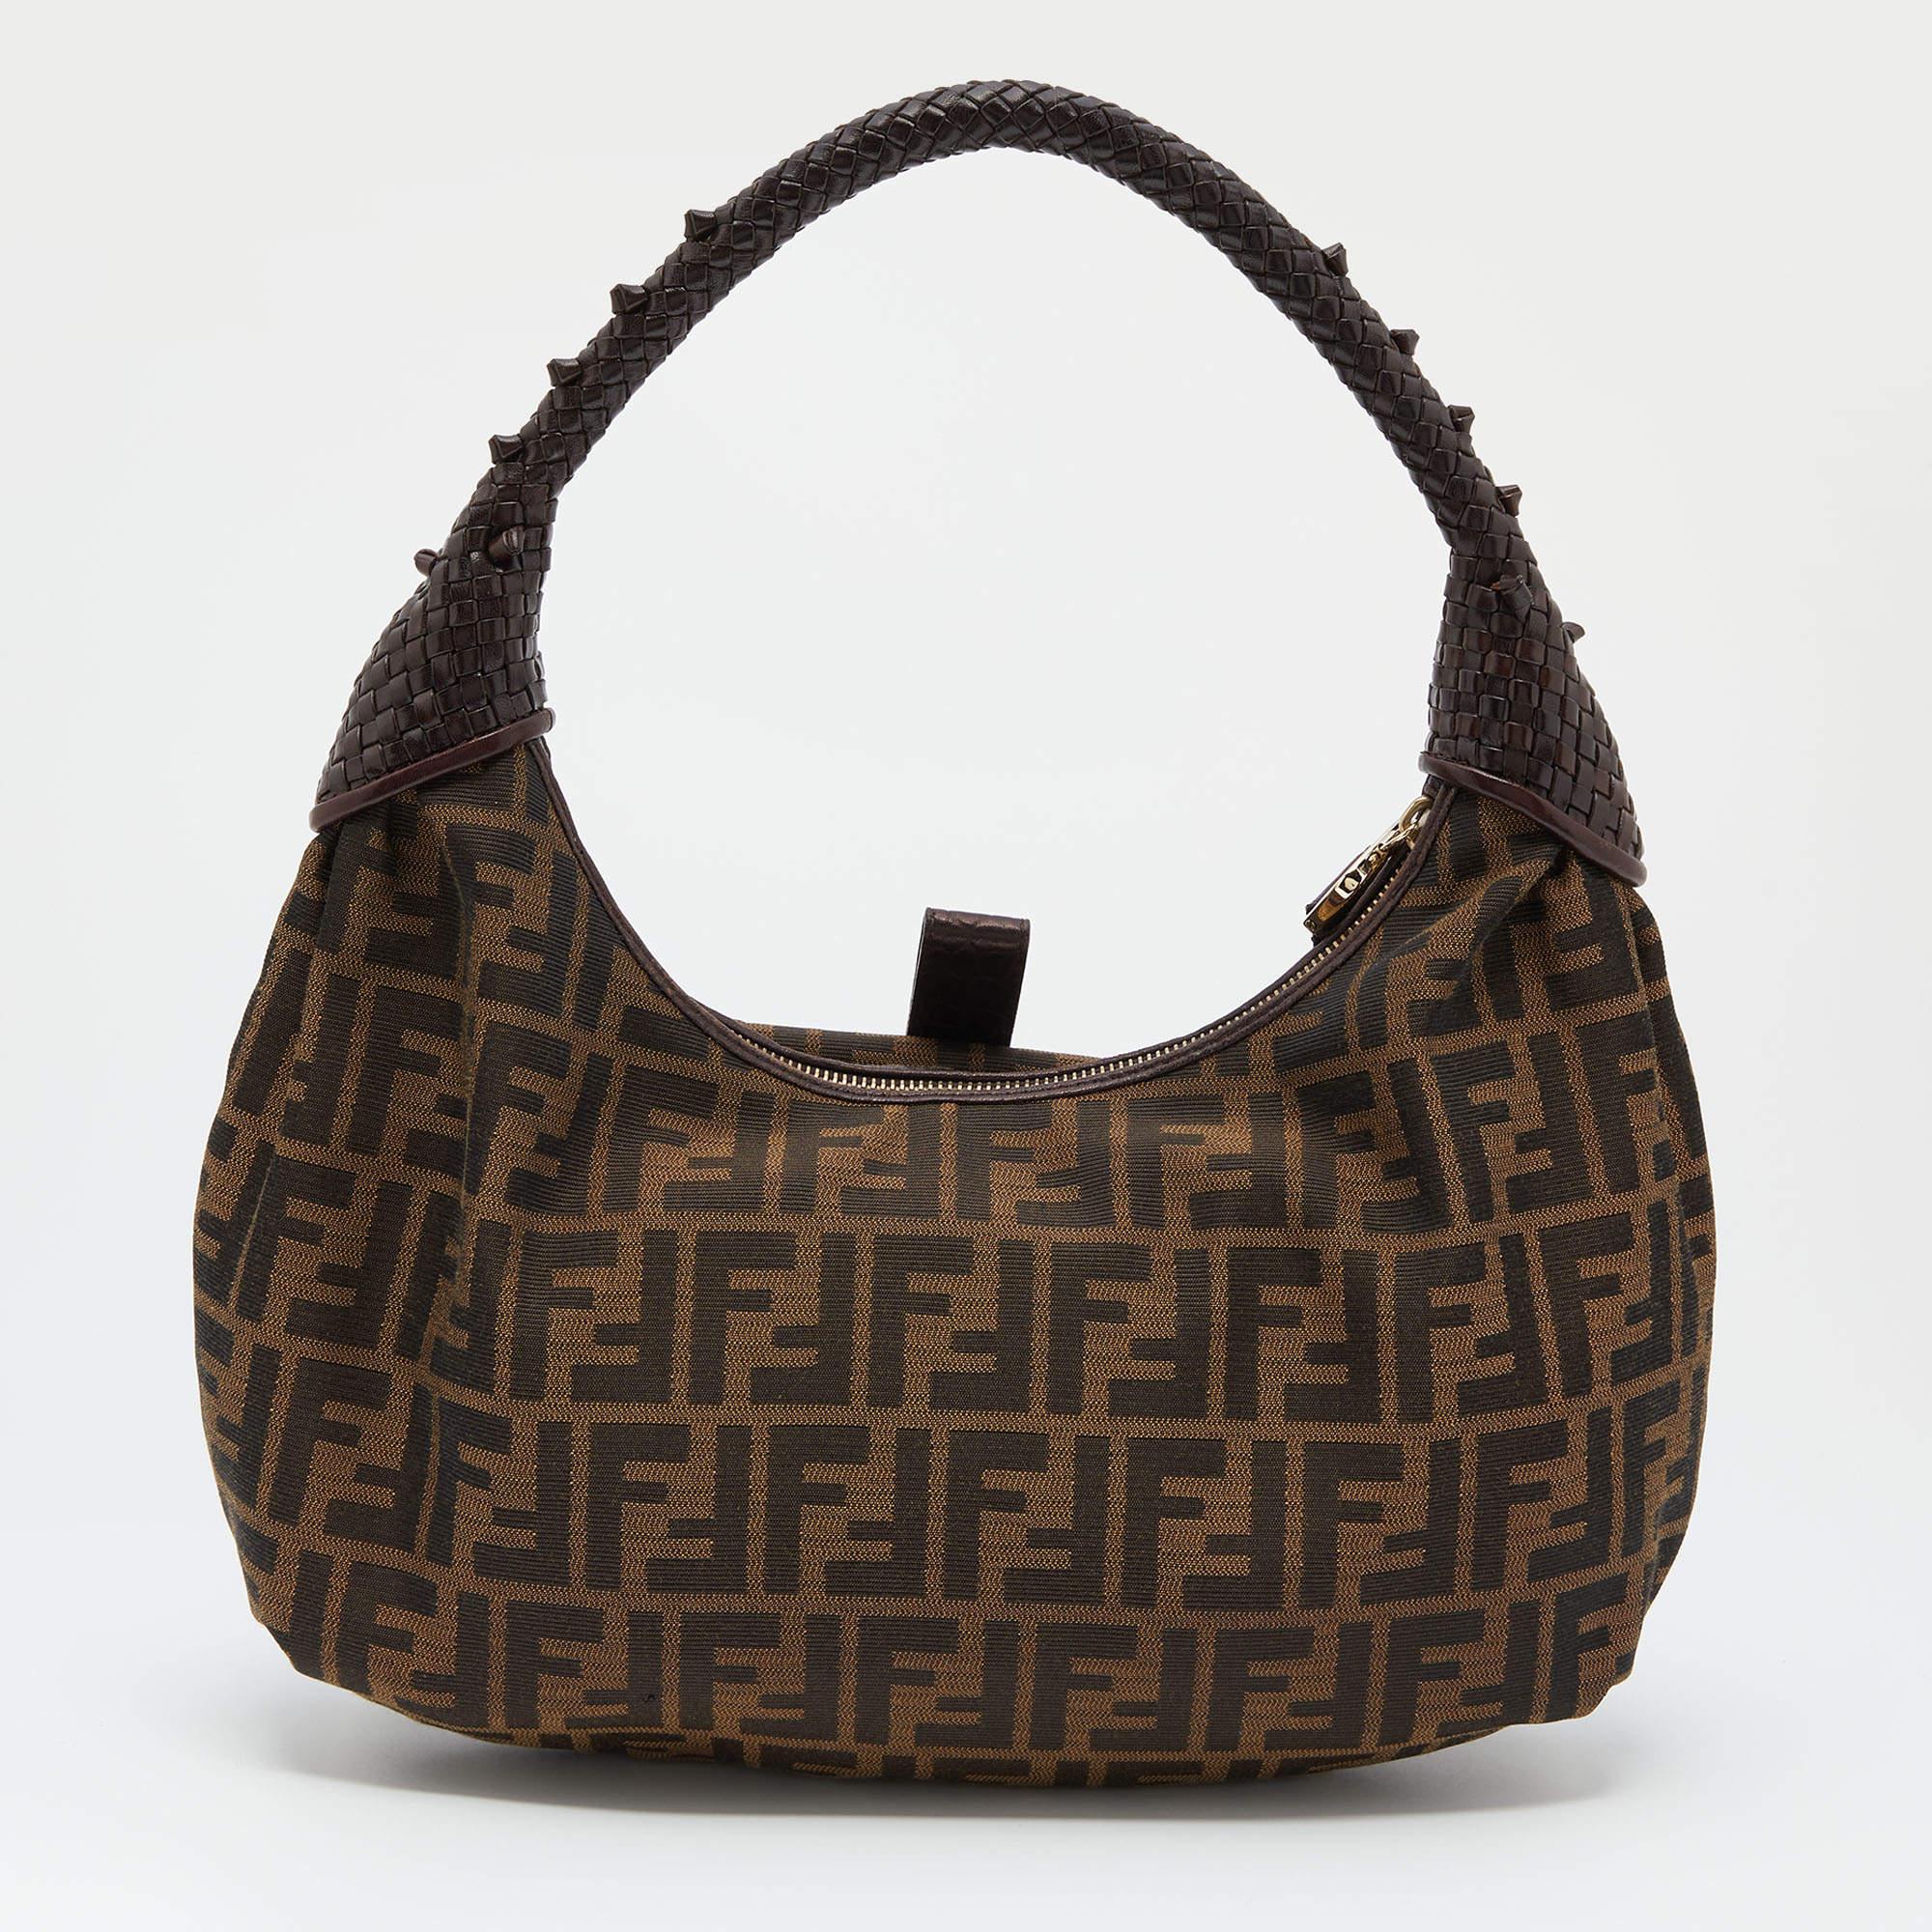 This chic Spy hobo is from Fendi. Crafted from classic Zucca canvas and styled with leather trims, it features a weave pattern on the handle. The zip top closure opens to a fabric lined spacious interior that will hold all your daily essentials.